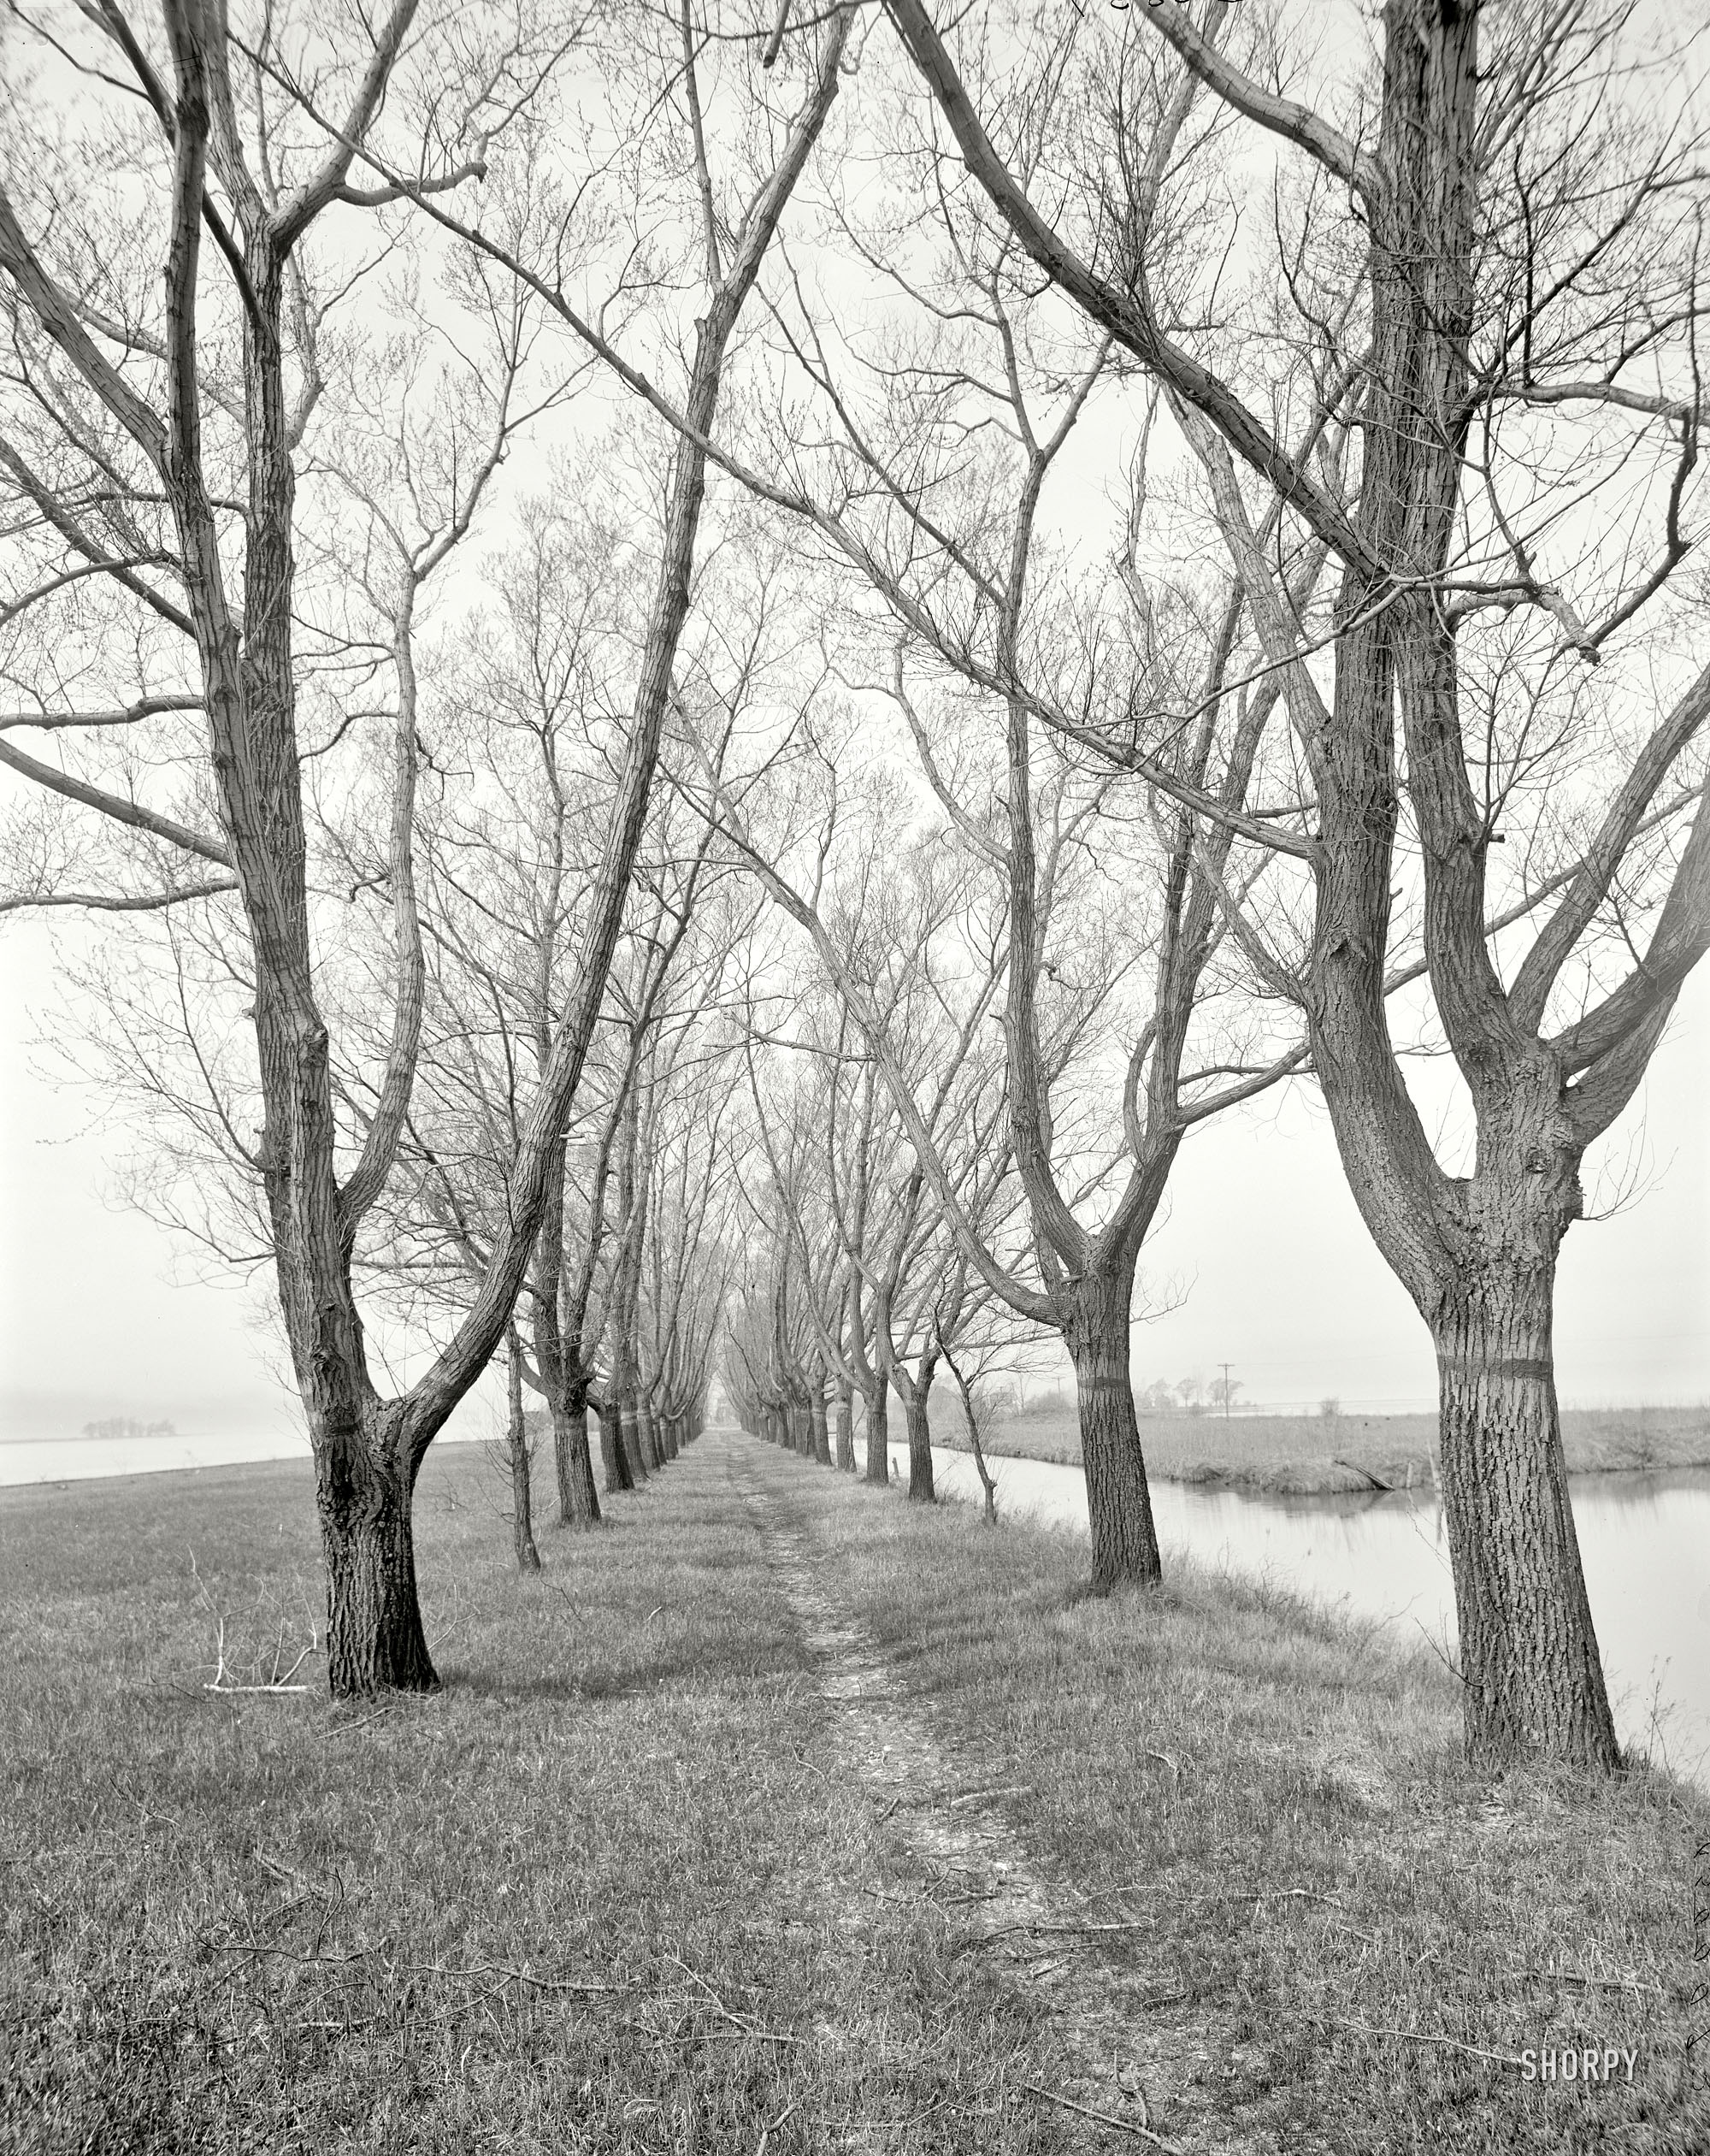 St. Clair Flats, Michigan, circa 1910. "Willow Avenue, Star Island." 8x10 inch dry plate glass negative, Detroit Publishing Company. View full size.